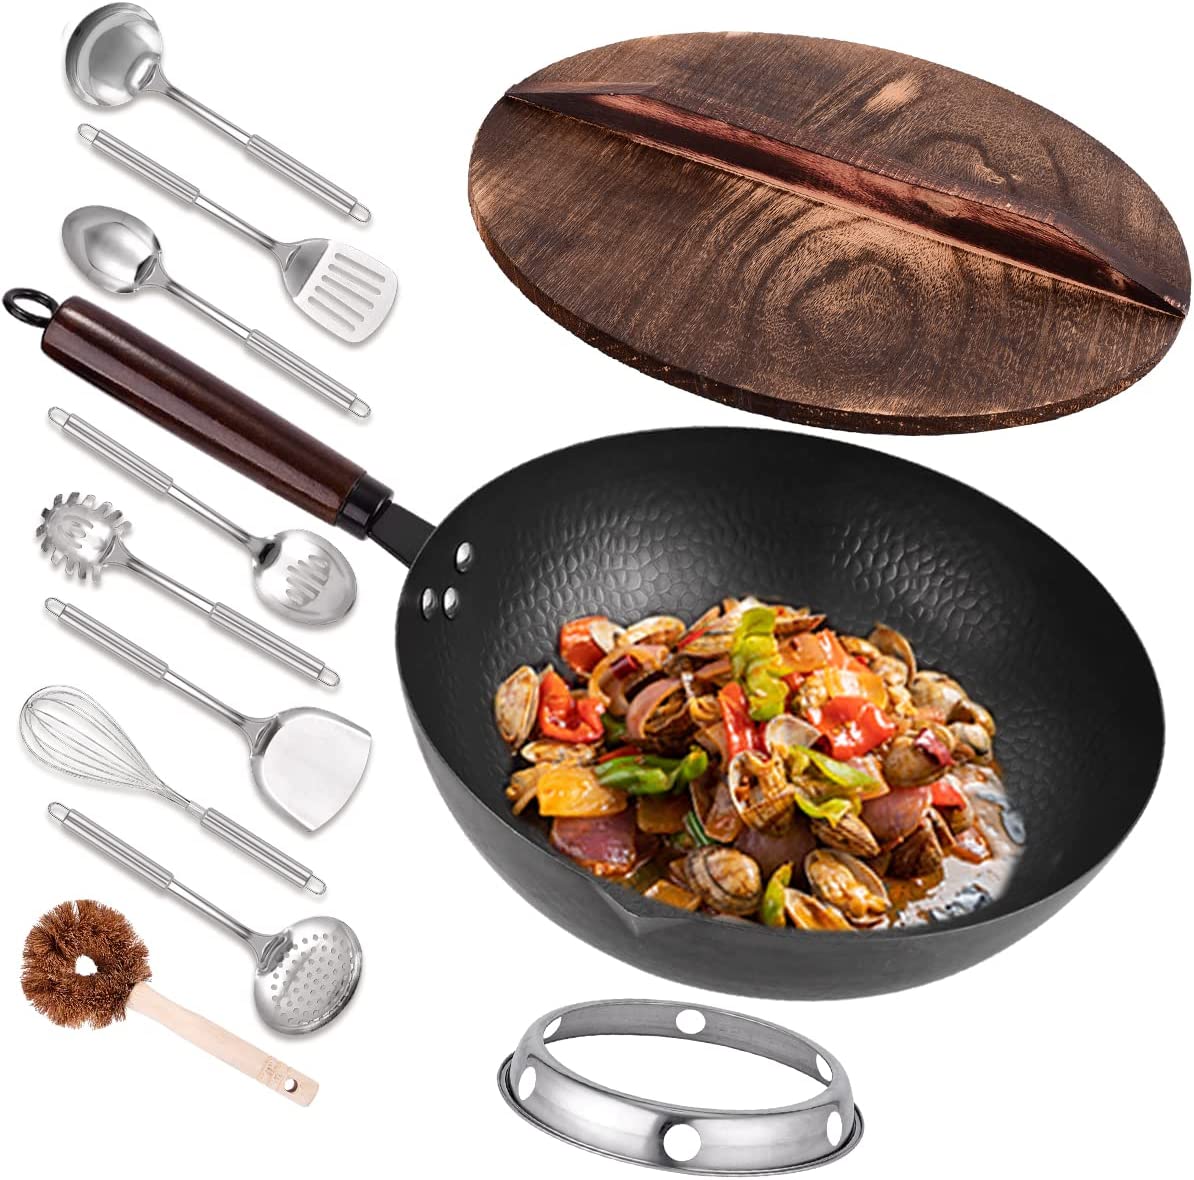 https://discounttoday.net/wp-content/uploads/2022/12/Leidawn-12.8-Carbon-Steel-Wok-11Pcs-Woks-and-Stir-Fry-Pans-with-Wooden-Handle-and-Lid10-Cookware-AccessoriesFor-ElectricInduction-and-Gas-Stoves.jpg